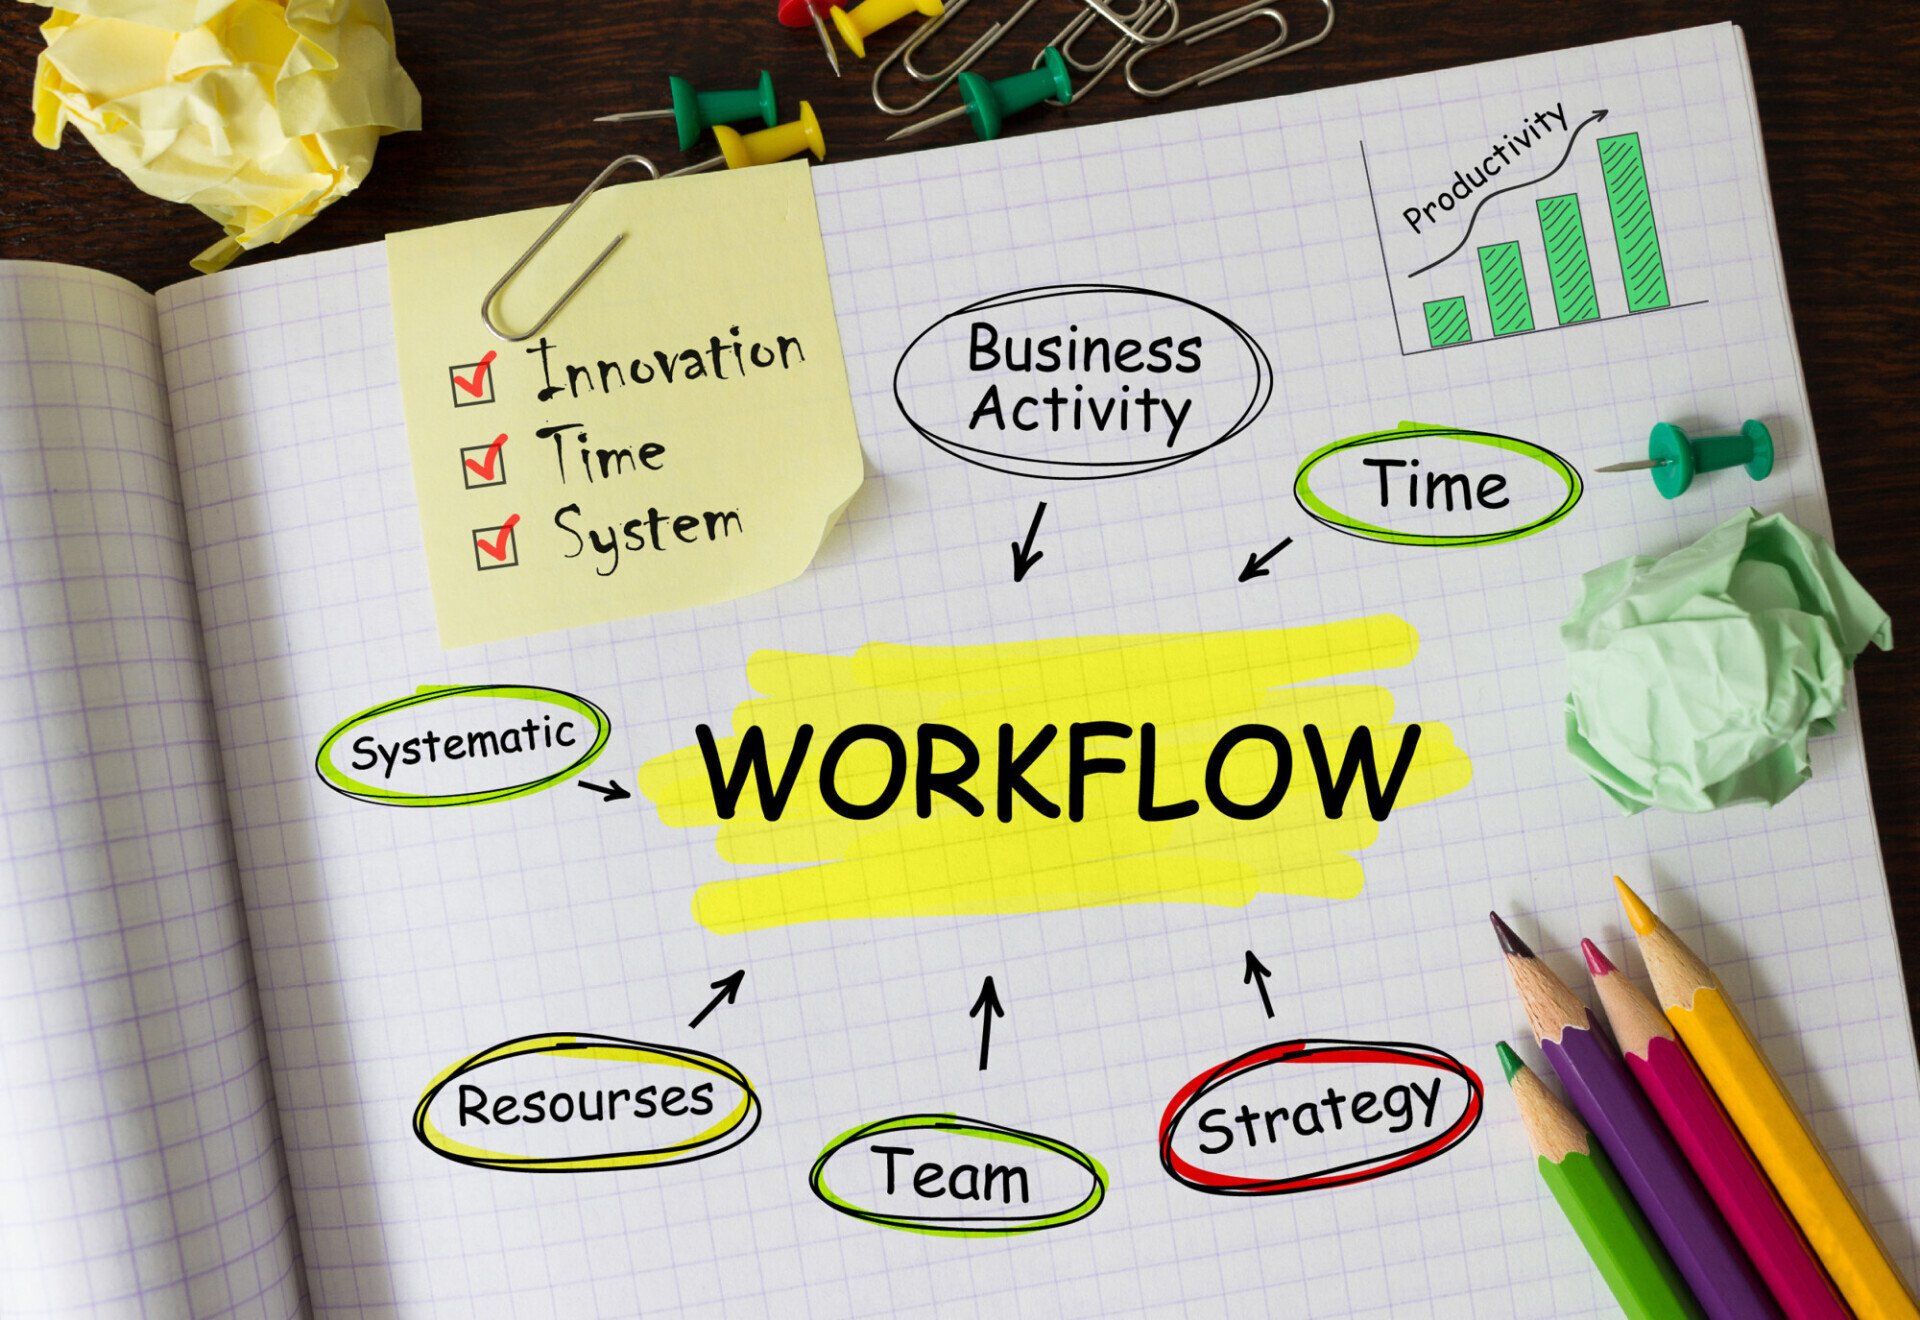 workflow picture drawn in a workbook